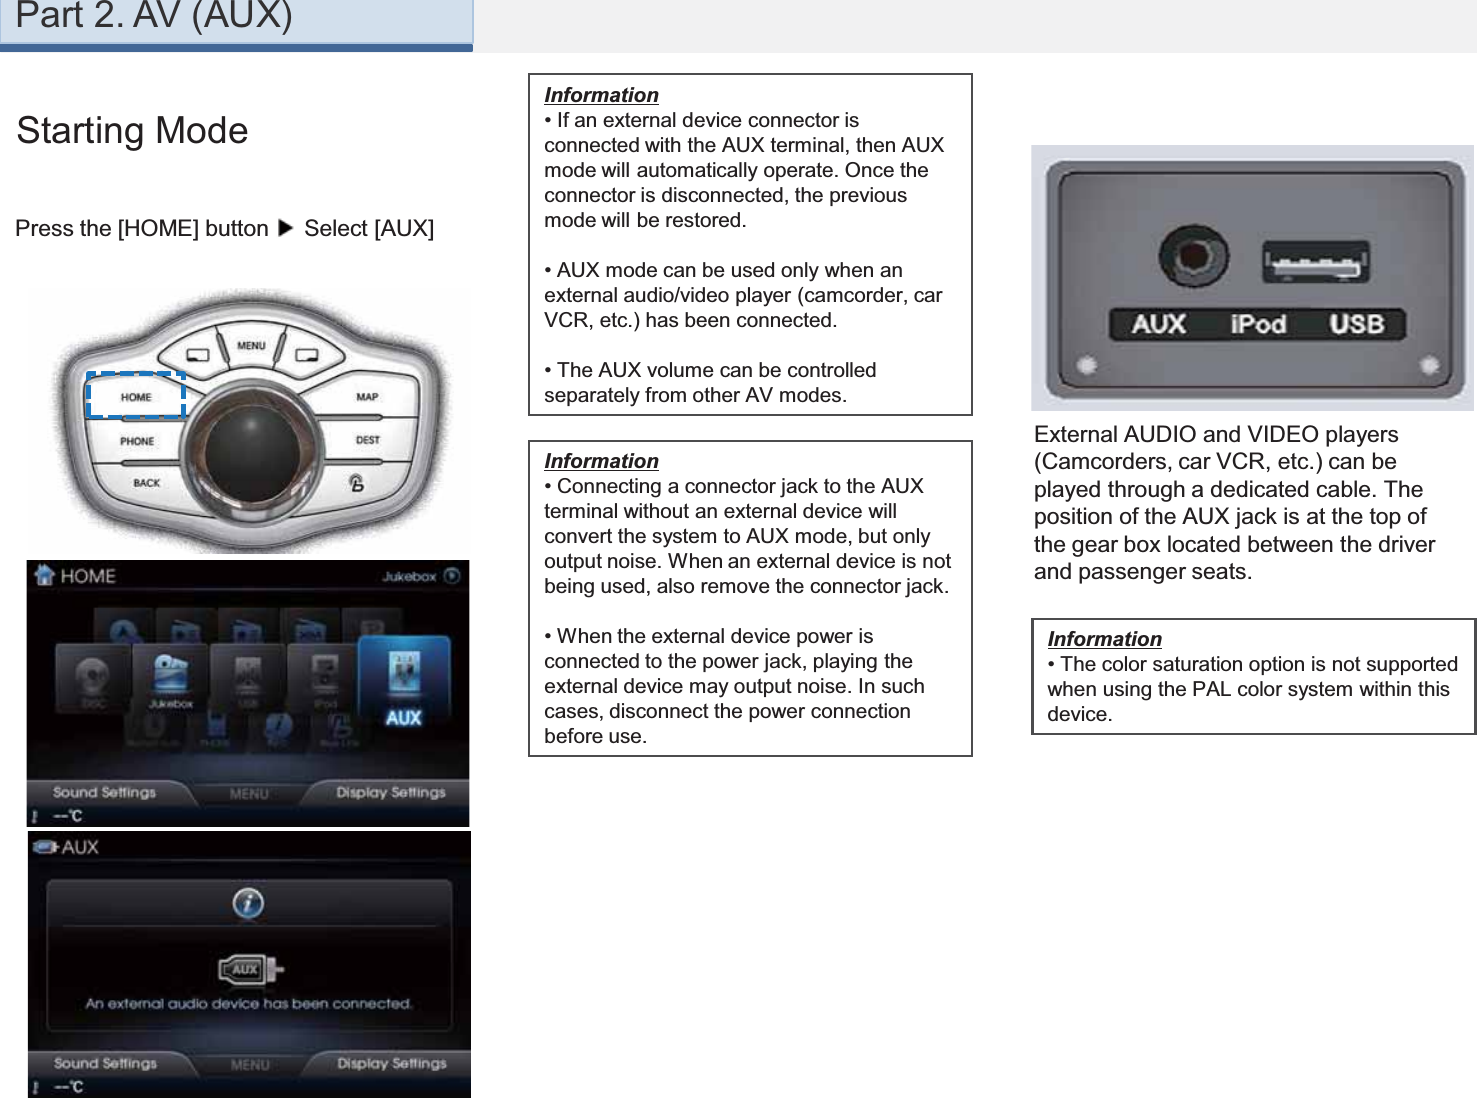 Part 2. AV (AUX)Starting ModePress the [HOME] button Select [AUX]External AUDIO and VIDEO players (Camcorders, car VCR, etc.) can be played through a dedicated cable. The position of the AUX jack is at the top of the gear box located between the driver and passenger seats.Information• If an external device connector is connected with the AUX terminal, then AUX mode will automatically operate. Once the connector is disconnected, the previous mode will be restored.• AUX mode can be used only when an external audio/video player (camcorder, car VCR, etc.) has been connected.• The AUX volume can be controlled separately from other AV modes.Information• Connecting a connector jack to the AUX terminal without an external device will convert the system to AUX mode, but only output noise. When an external device is not being used, also remove the connector jack.• When the external device power is connected to the power jack, playing the external device may output noise. In such cases, disconnect the power connection before use.Information•The color saturation option is not supported when using the PAL color system within this device.